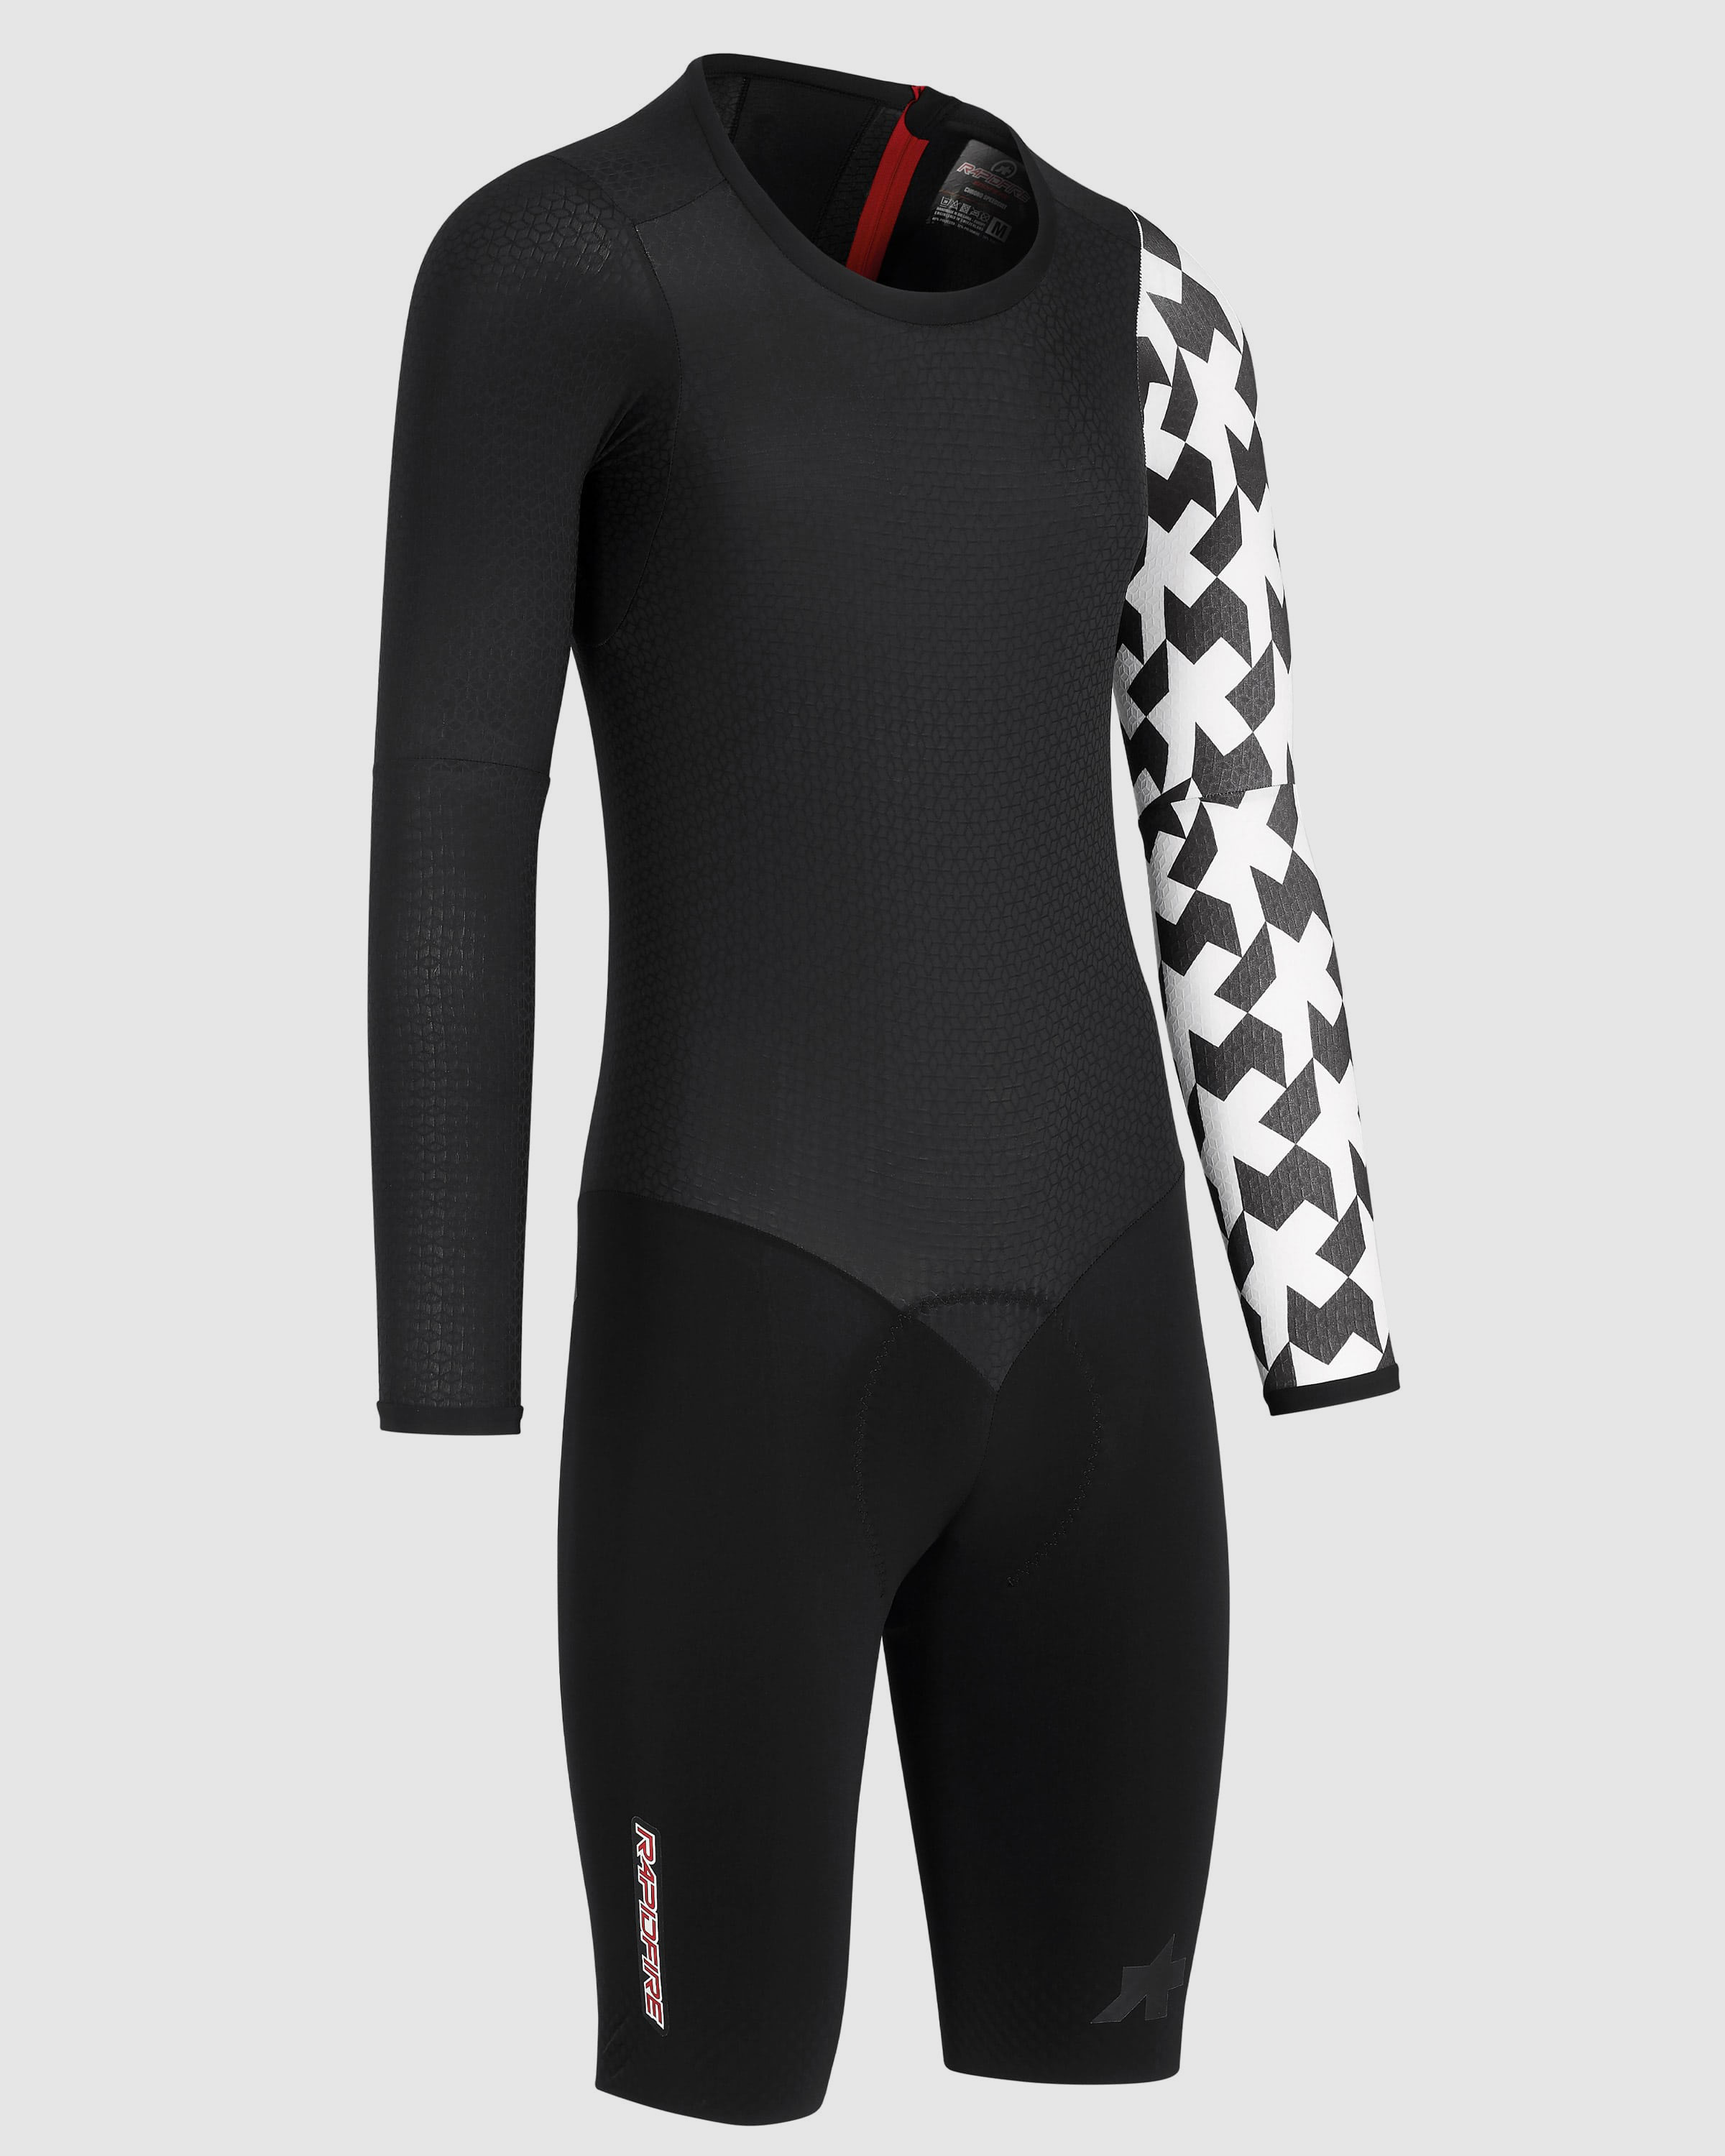 EQUIPE RS Rapidfire Chronosuit S9 - ASSOS Of Switzerland - Official Outlet